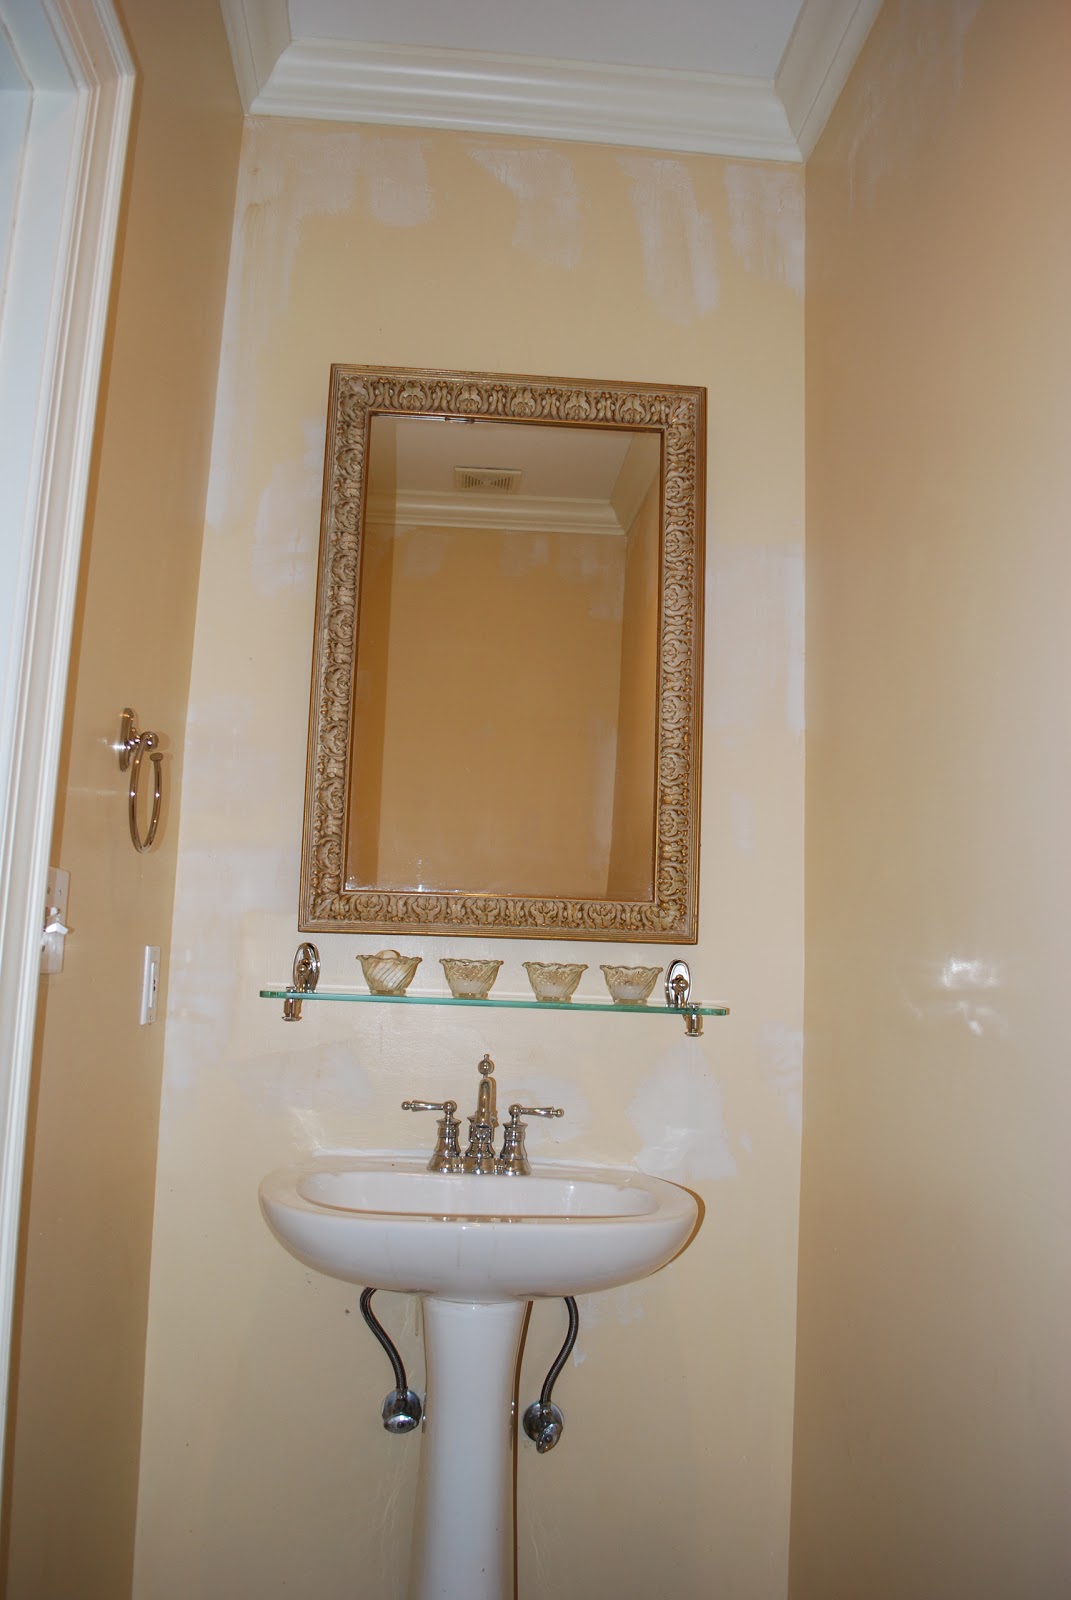 interior design musings: Double Take - Powder Room Makeover